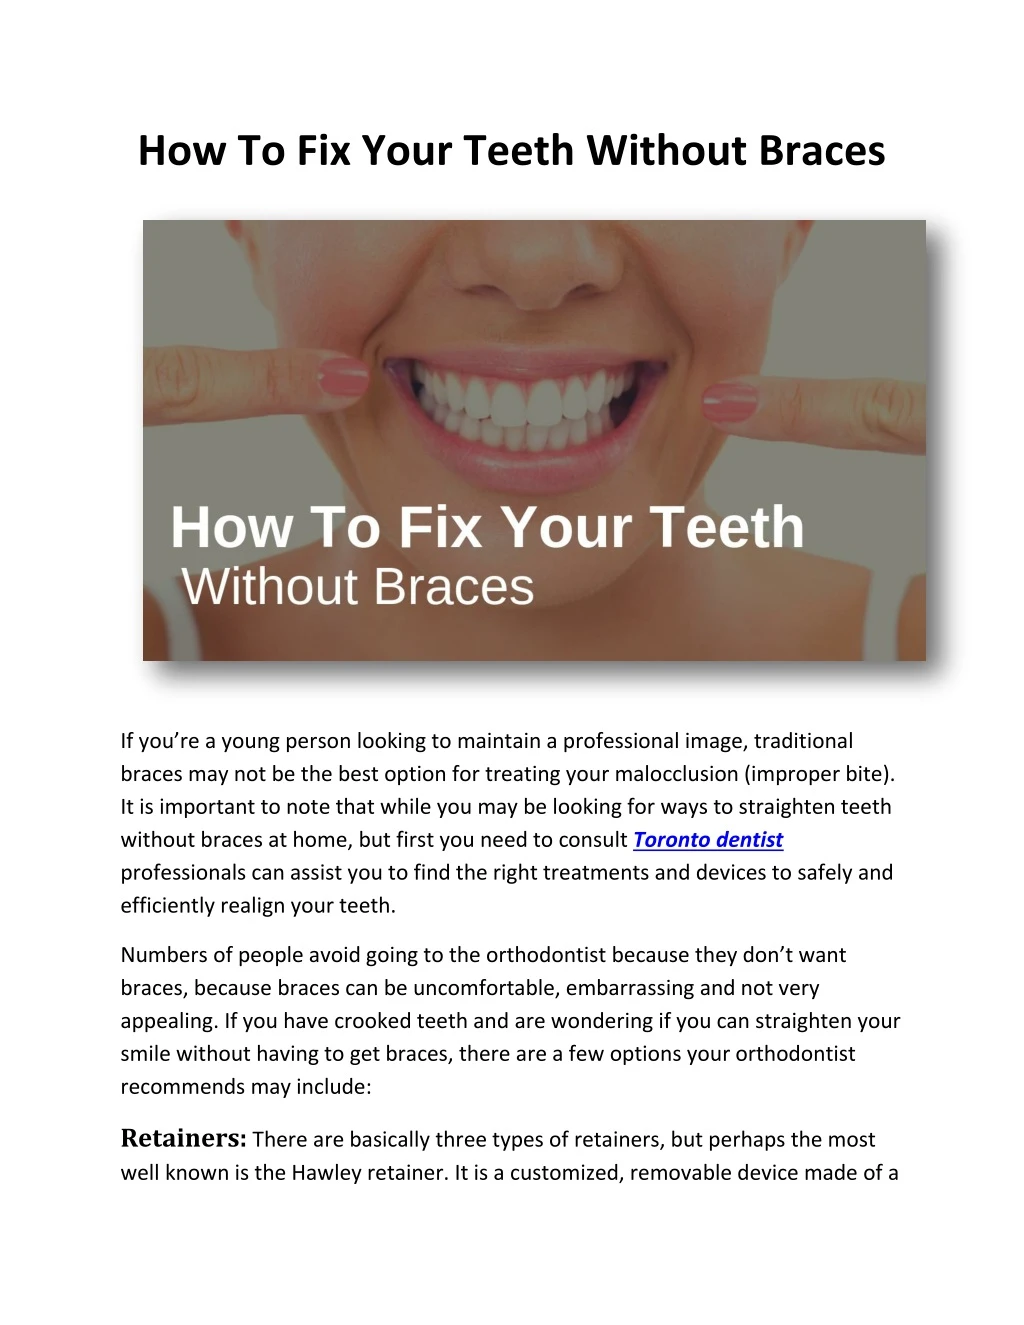 how to fix your teeth without braces